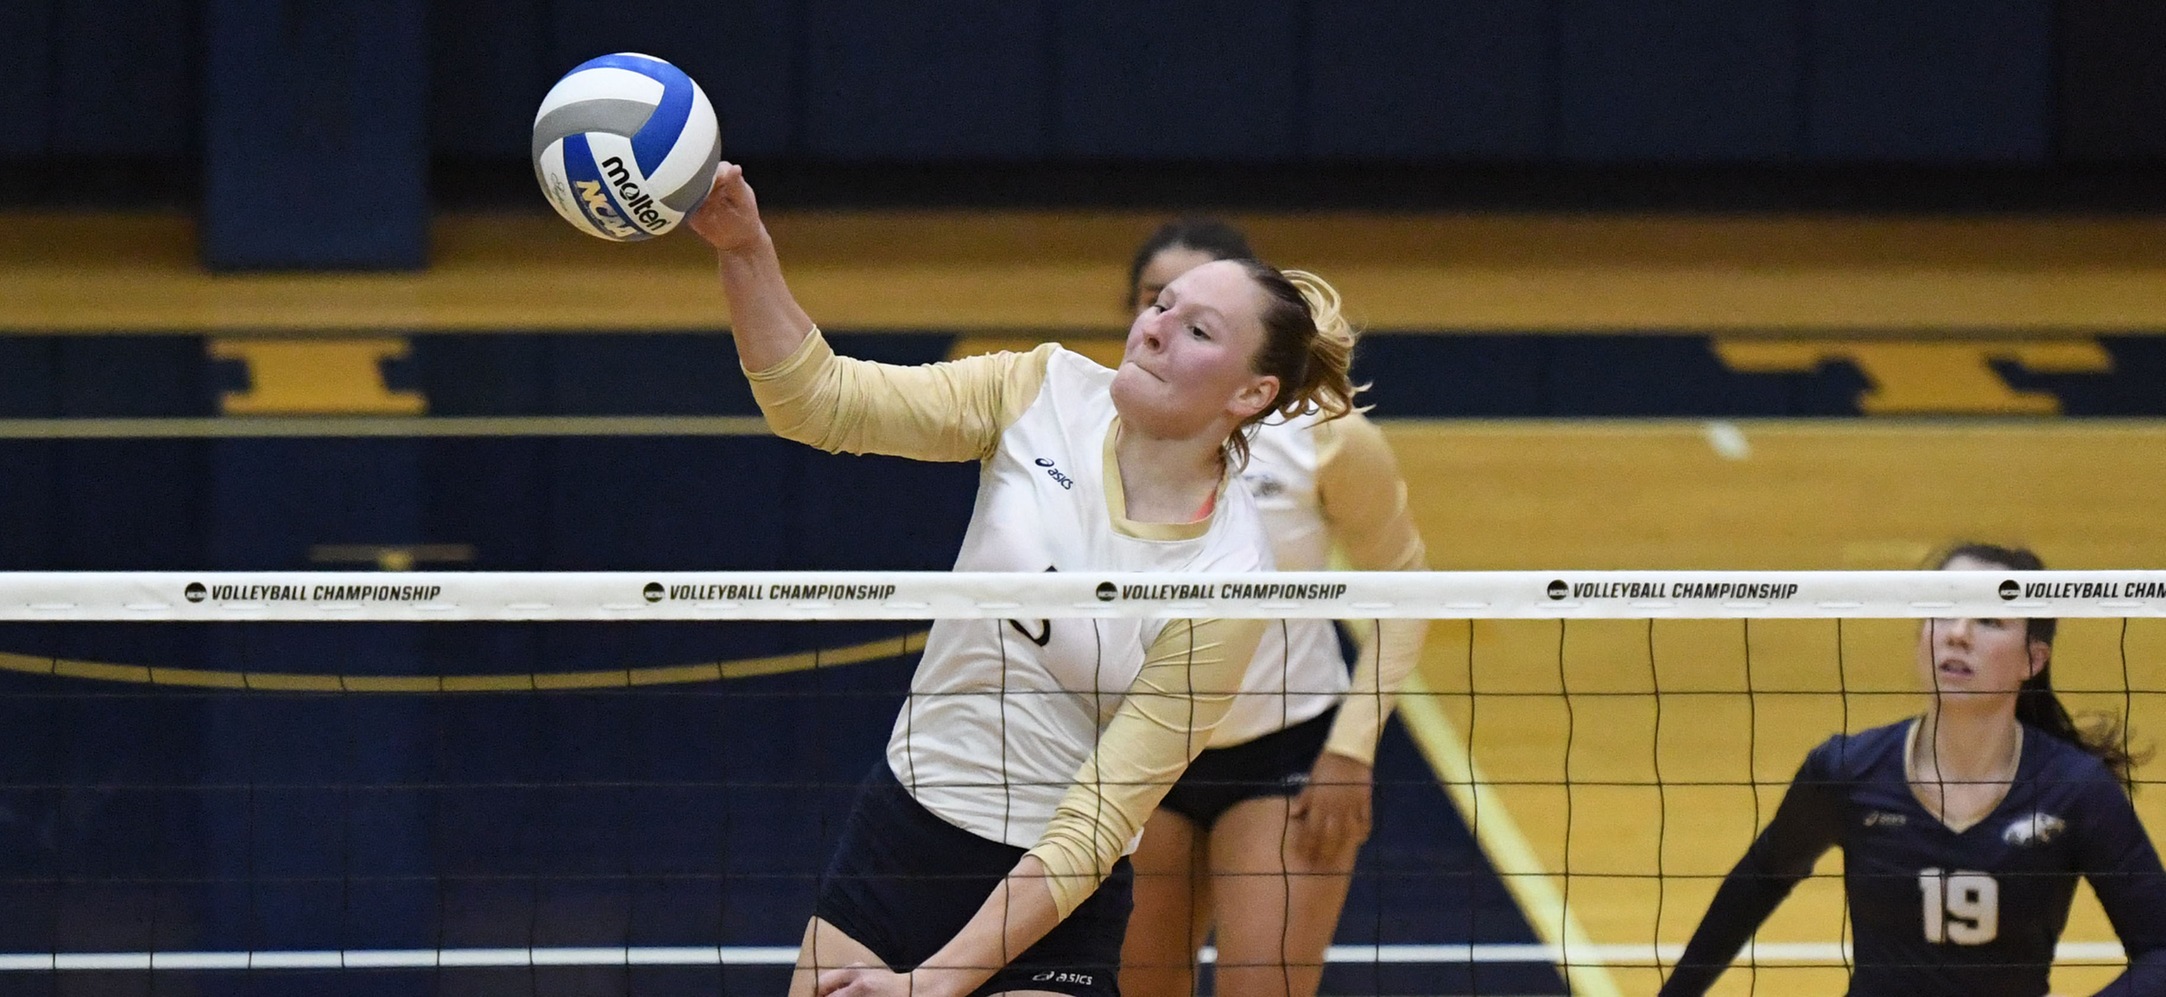 Marybeth Weihbrecht hit an efficient .625 with 11 kills to go with her two solo blocks and four block assists.